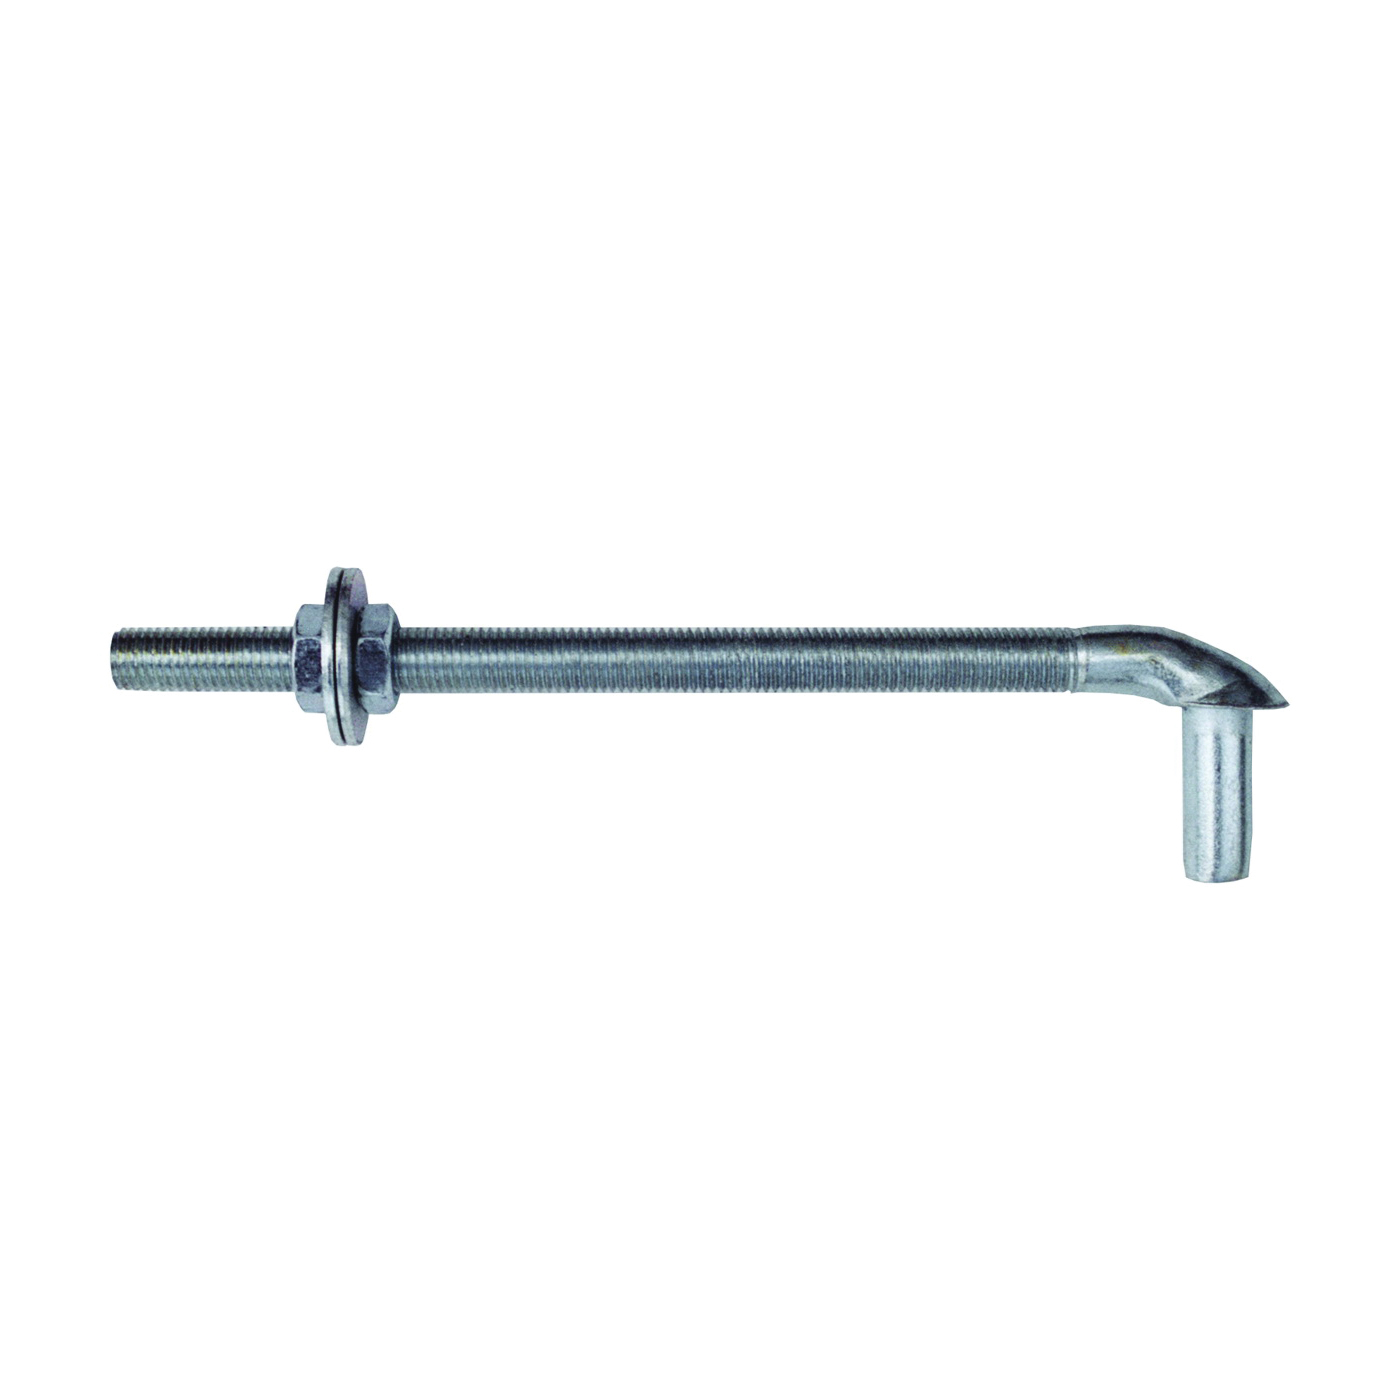 Behlen Country 40300029 Bolt Hook, Metal, Zinc, For: 2 in Gates